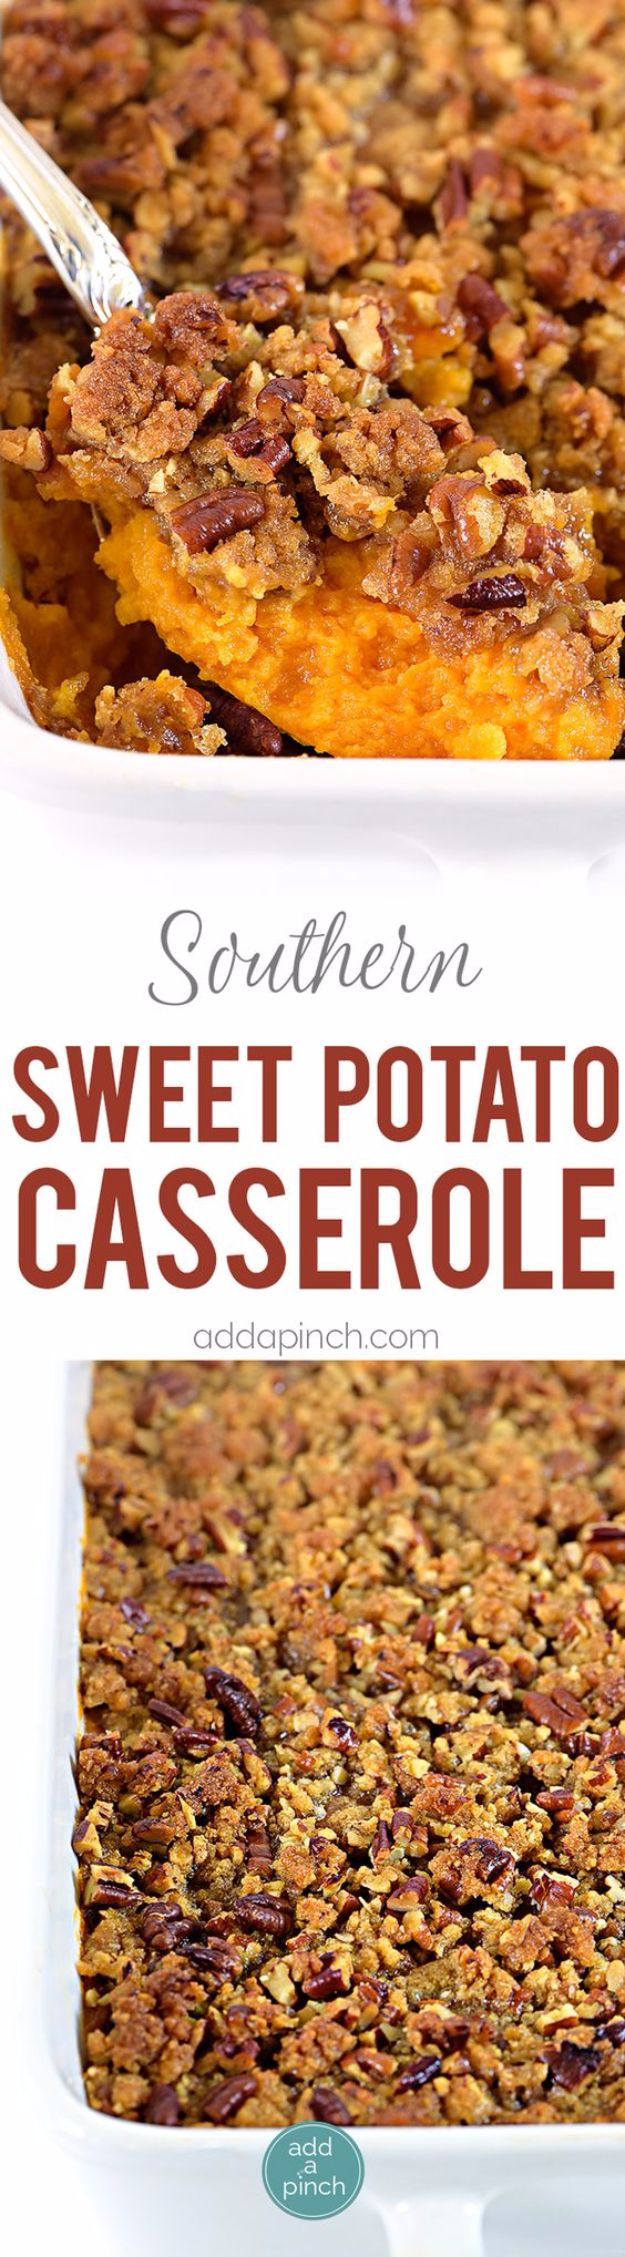 Best Country Cooking Recipes - Southern Sweet Potato Casserole - Easy Recipes for Country Food Like Chicken Fried Steak, Fried Green Tomatoes, Southern Gravy, Breads and Biscuits, Casseroles and More - Breakfast, Lunch and Dinner Recipe Ideas for Families and Feeding A Crowd - Step by Step Instructions for Making Homestyle Dips, Snacks, Desserts #recipes